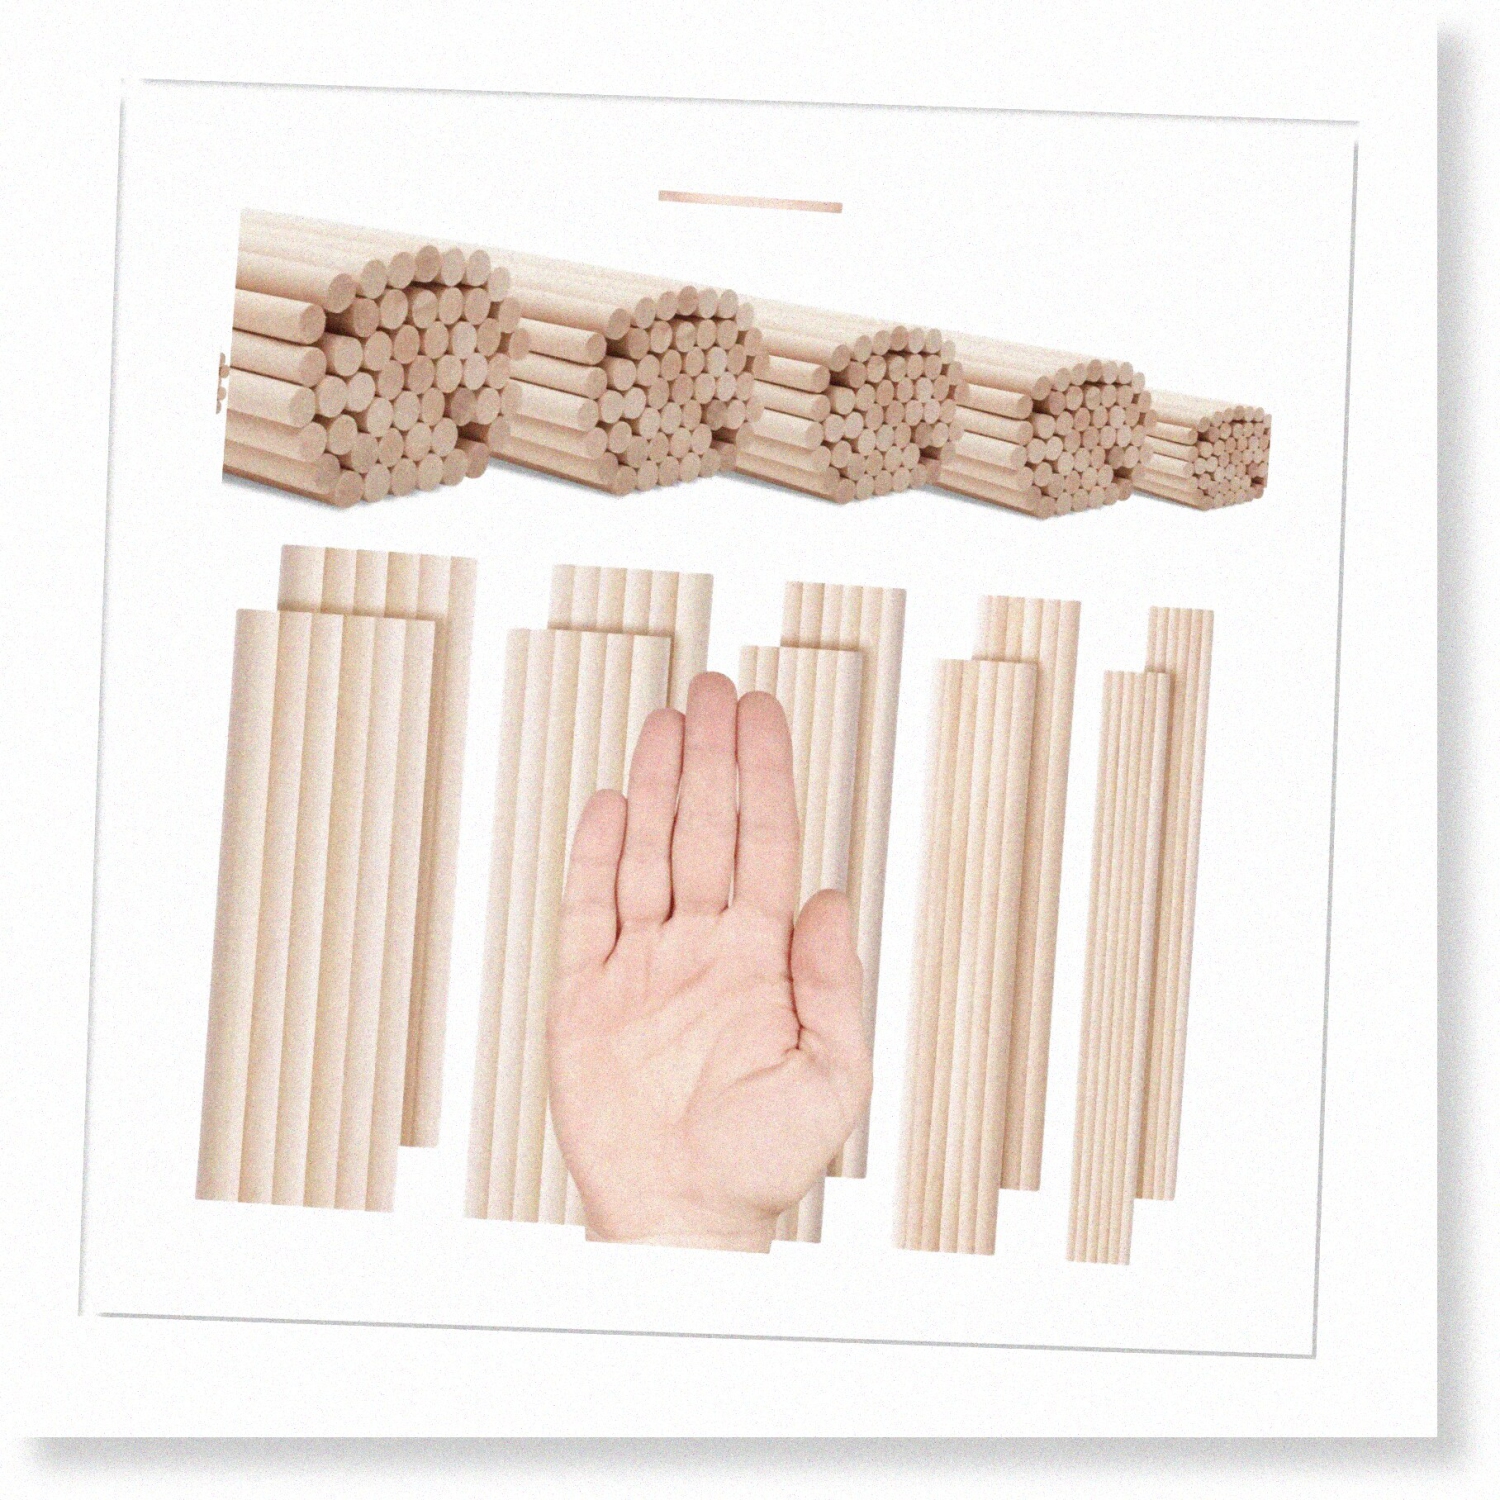 BambooCraft 100 PCS Assorted Wooden Dowel Rods - Versatile Wood Sticks for DIY Projects, Crafting, and Ingenuity - 1/8 3/16 1/4 5/16 3/8 x 6 Inch Long Sticks